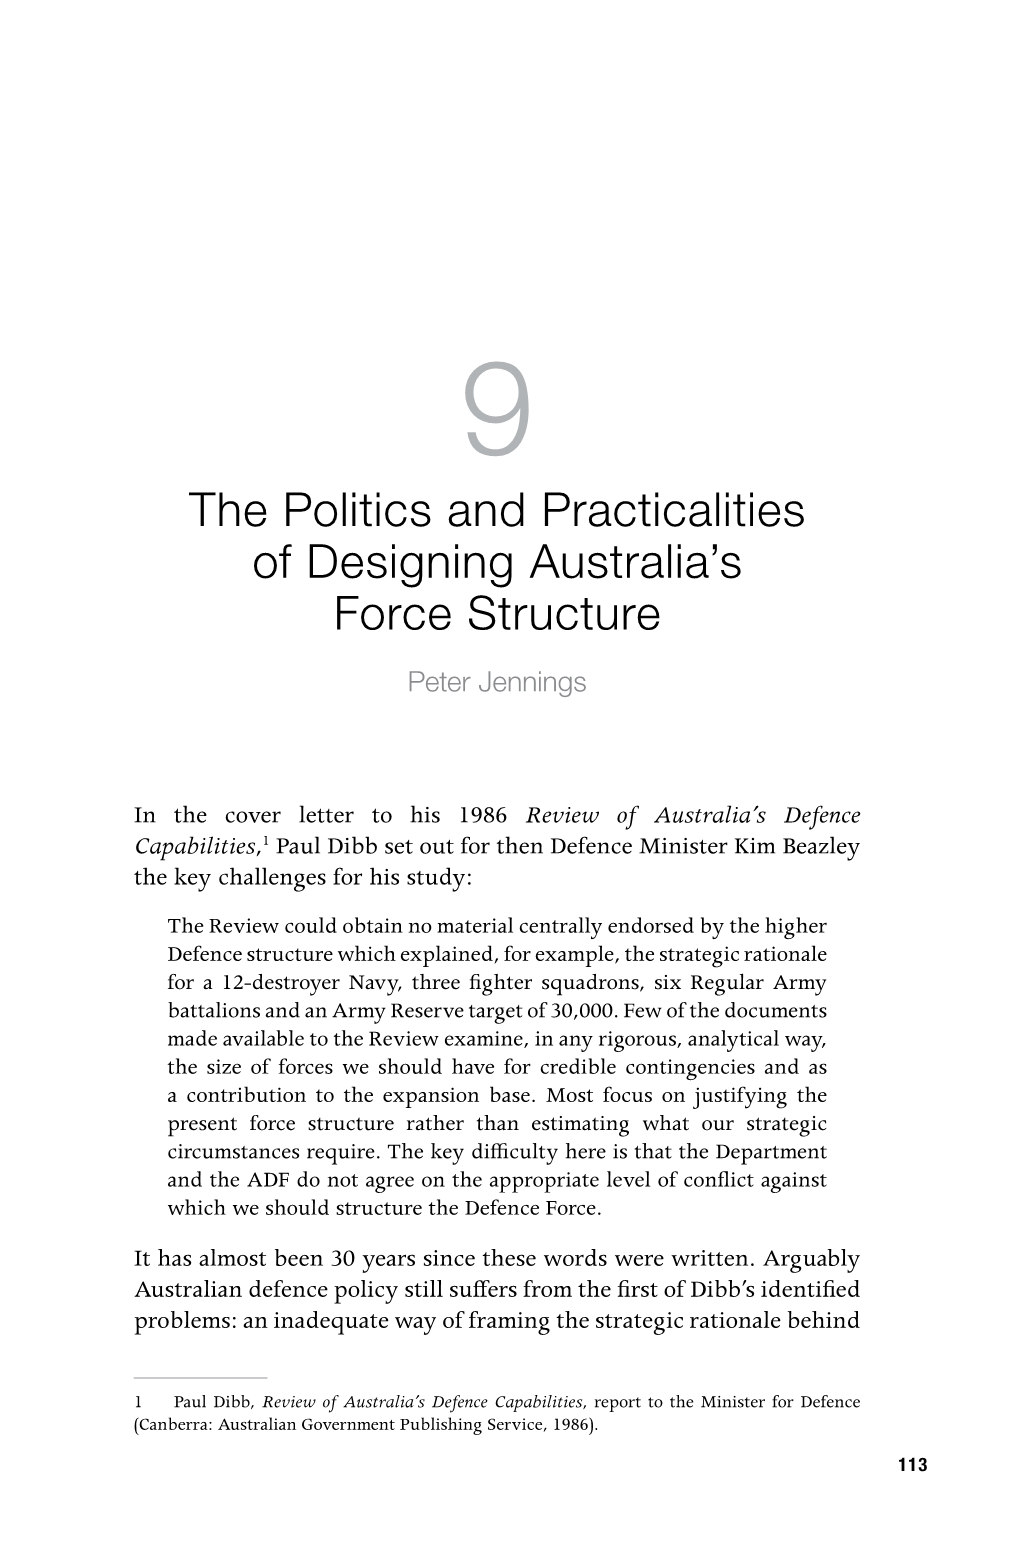 The Politics and Practicalities of Designing Australia's Force Structure